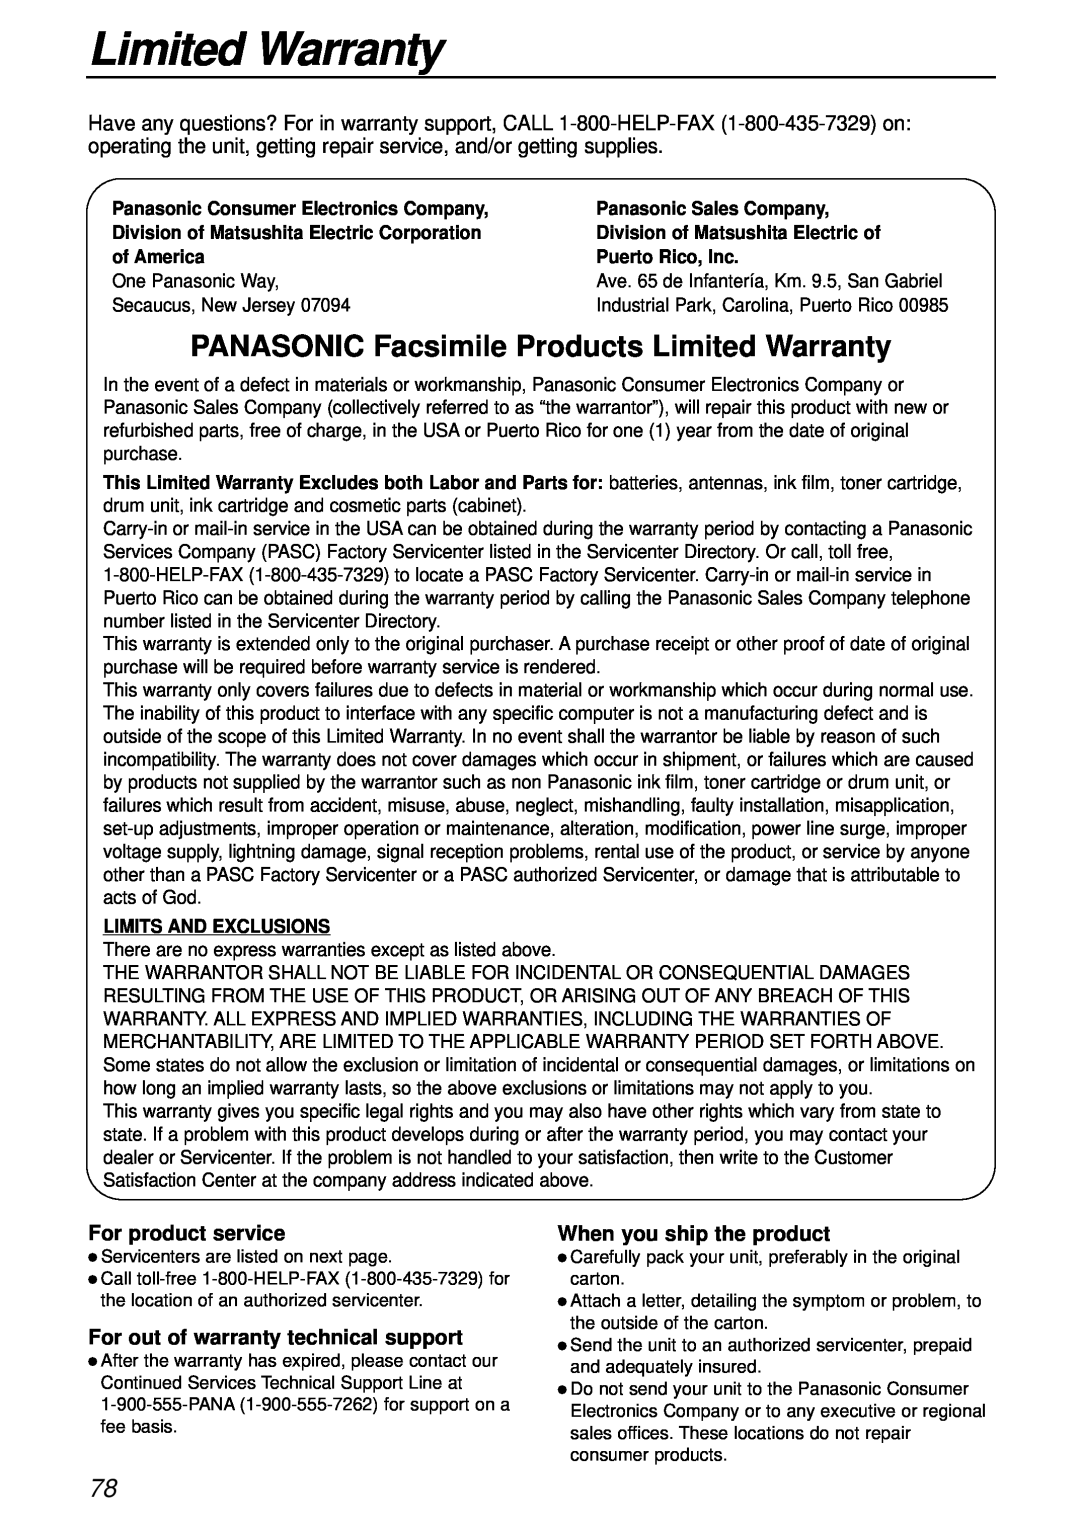 Panasonic KX-FL501 manual PANASONIC Facsimile Products Limited Warranty, For product service, When you ship the product 